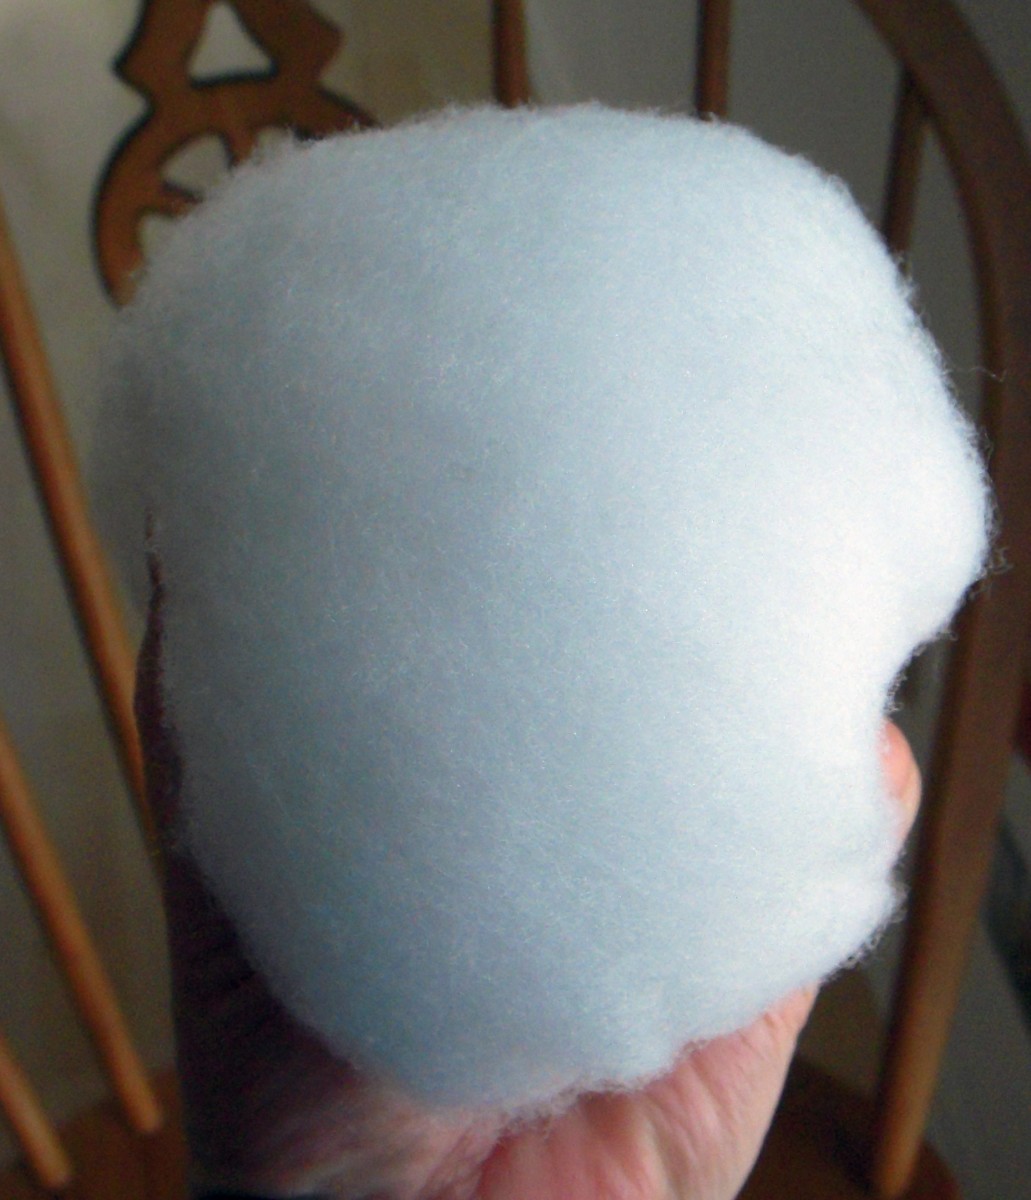 Make a ball of fluff about 10"-12" in circumference.